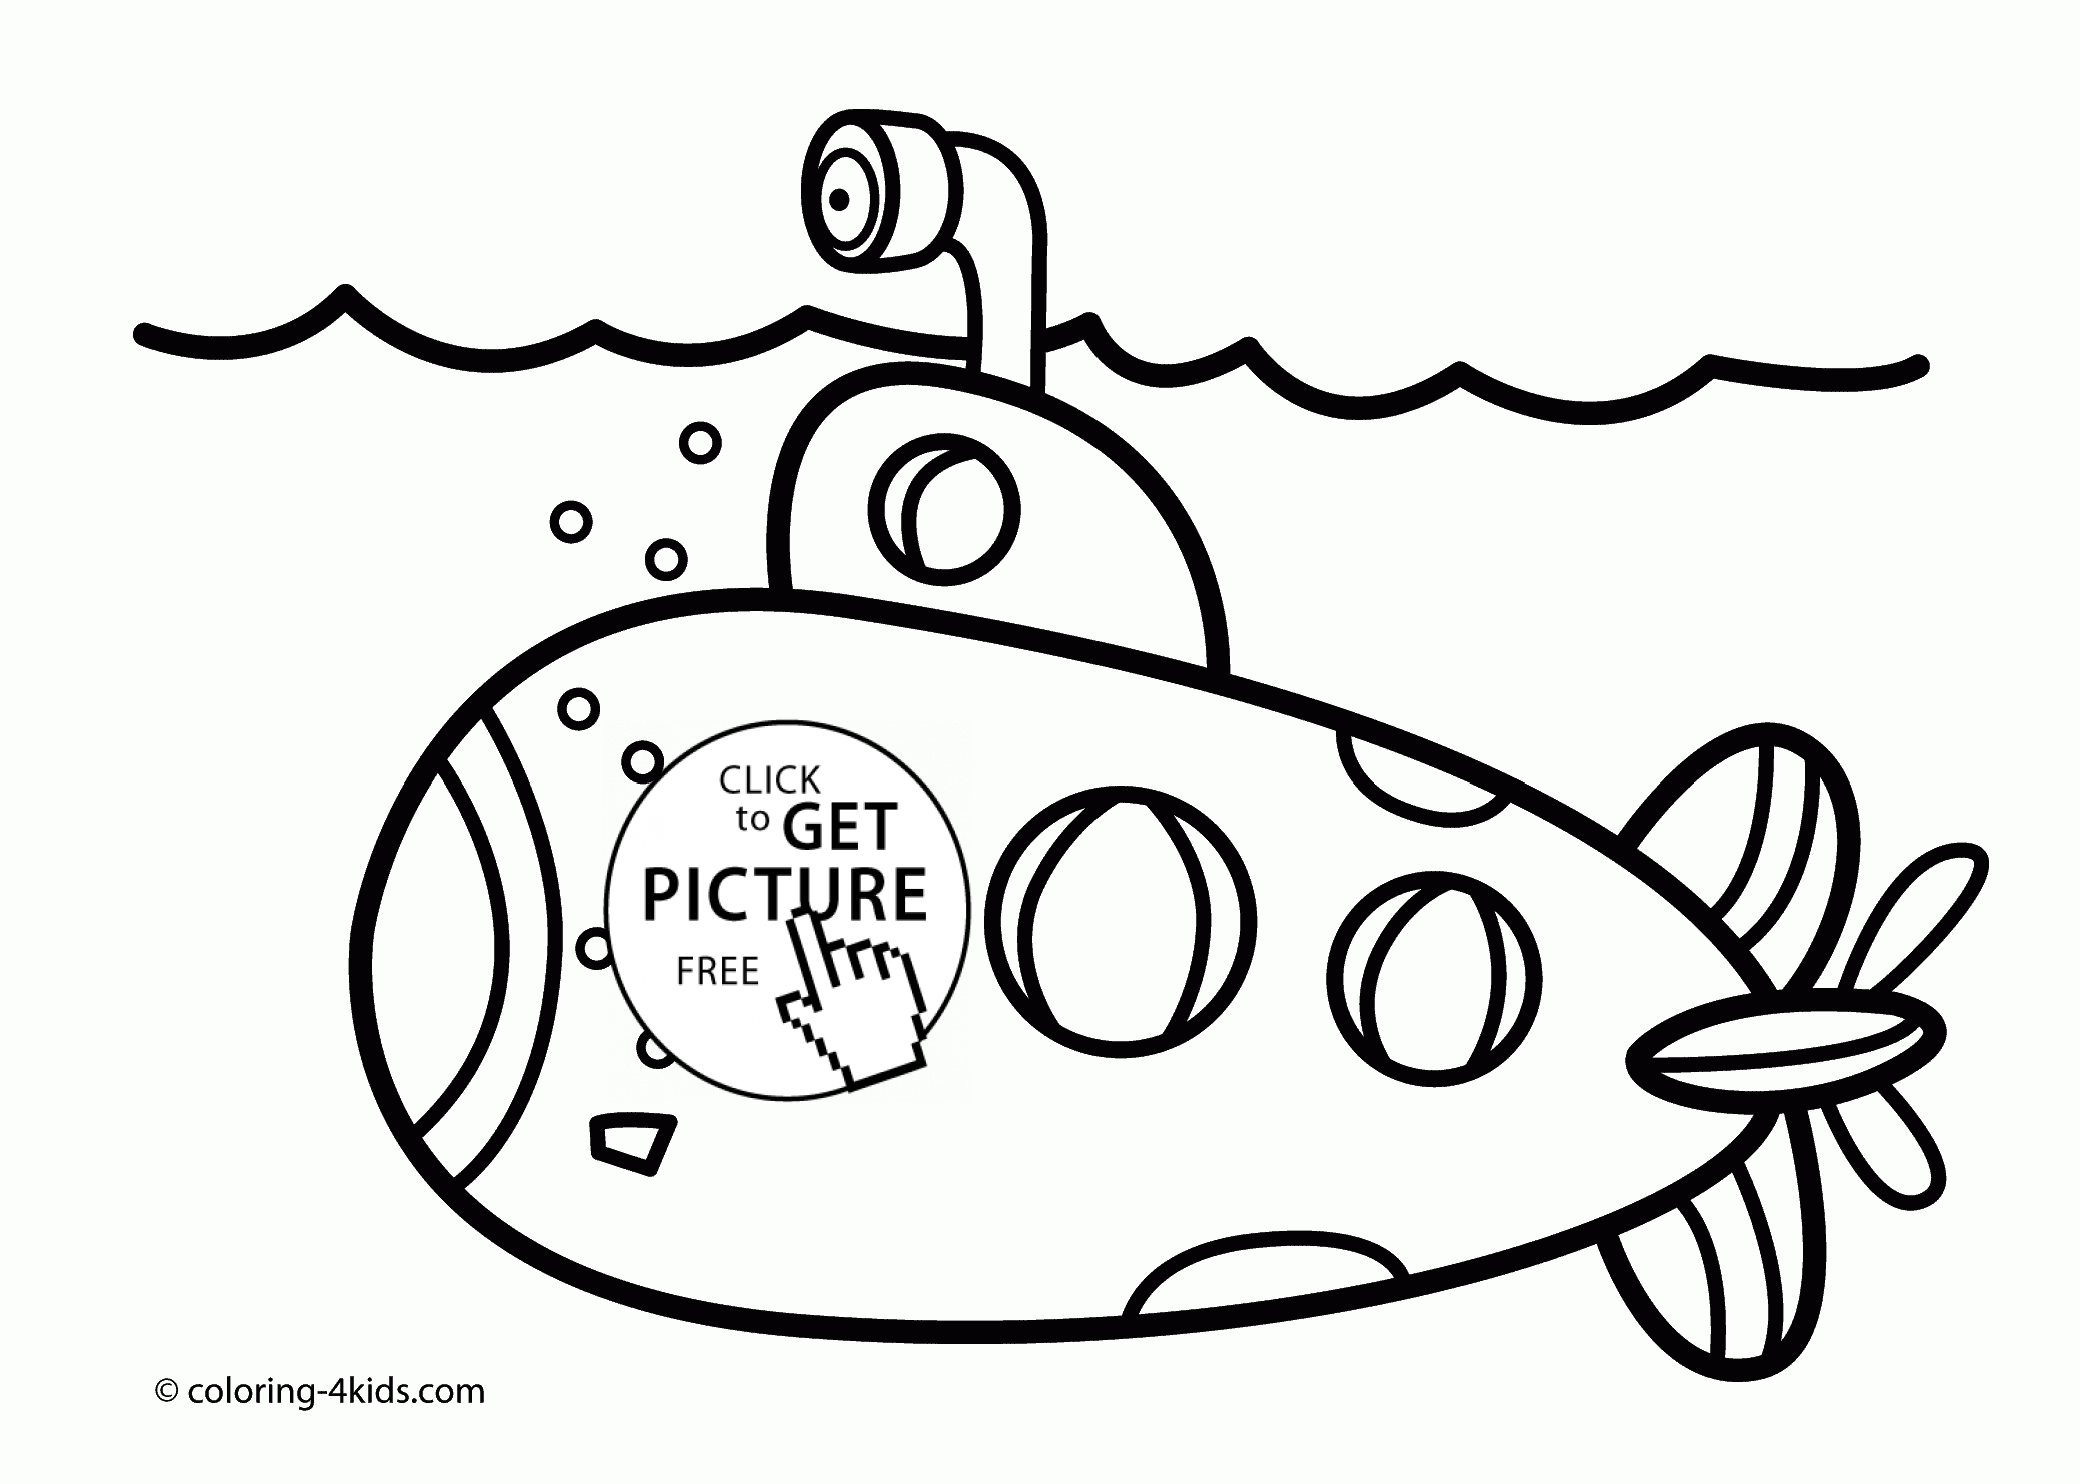 submarine clipart coloring